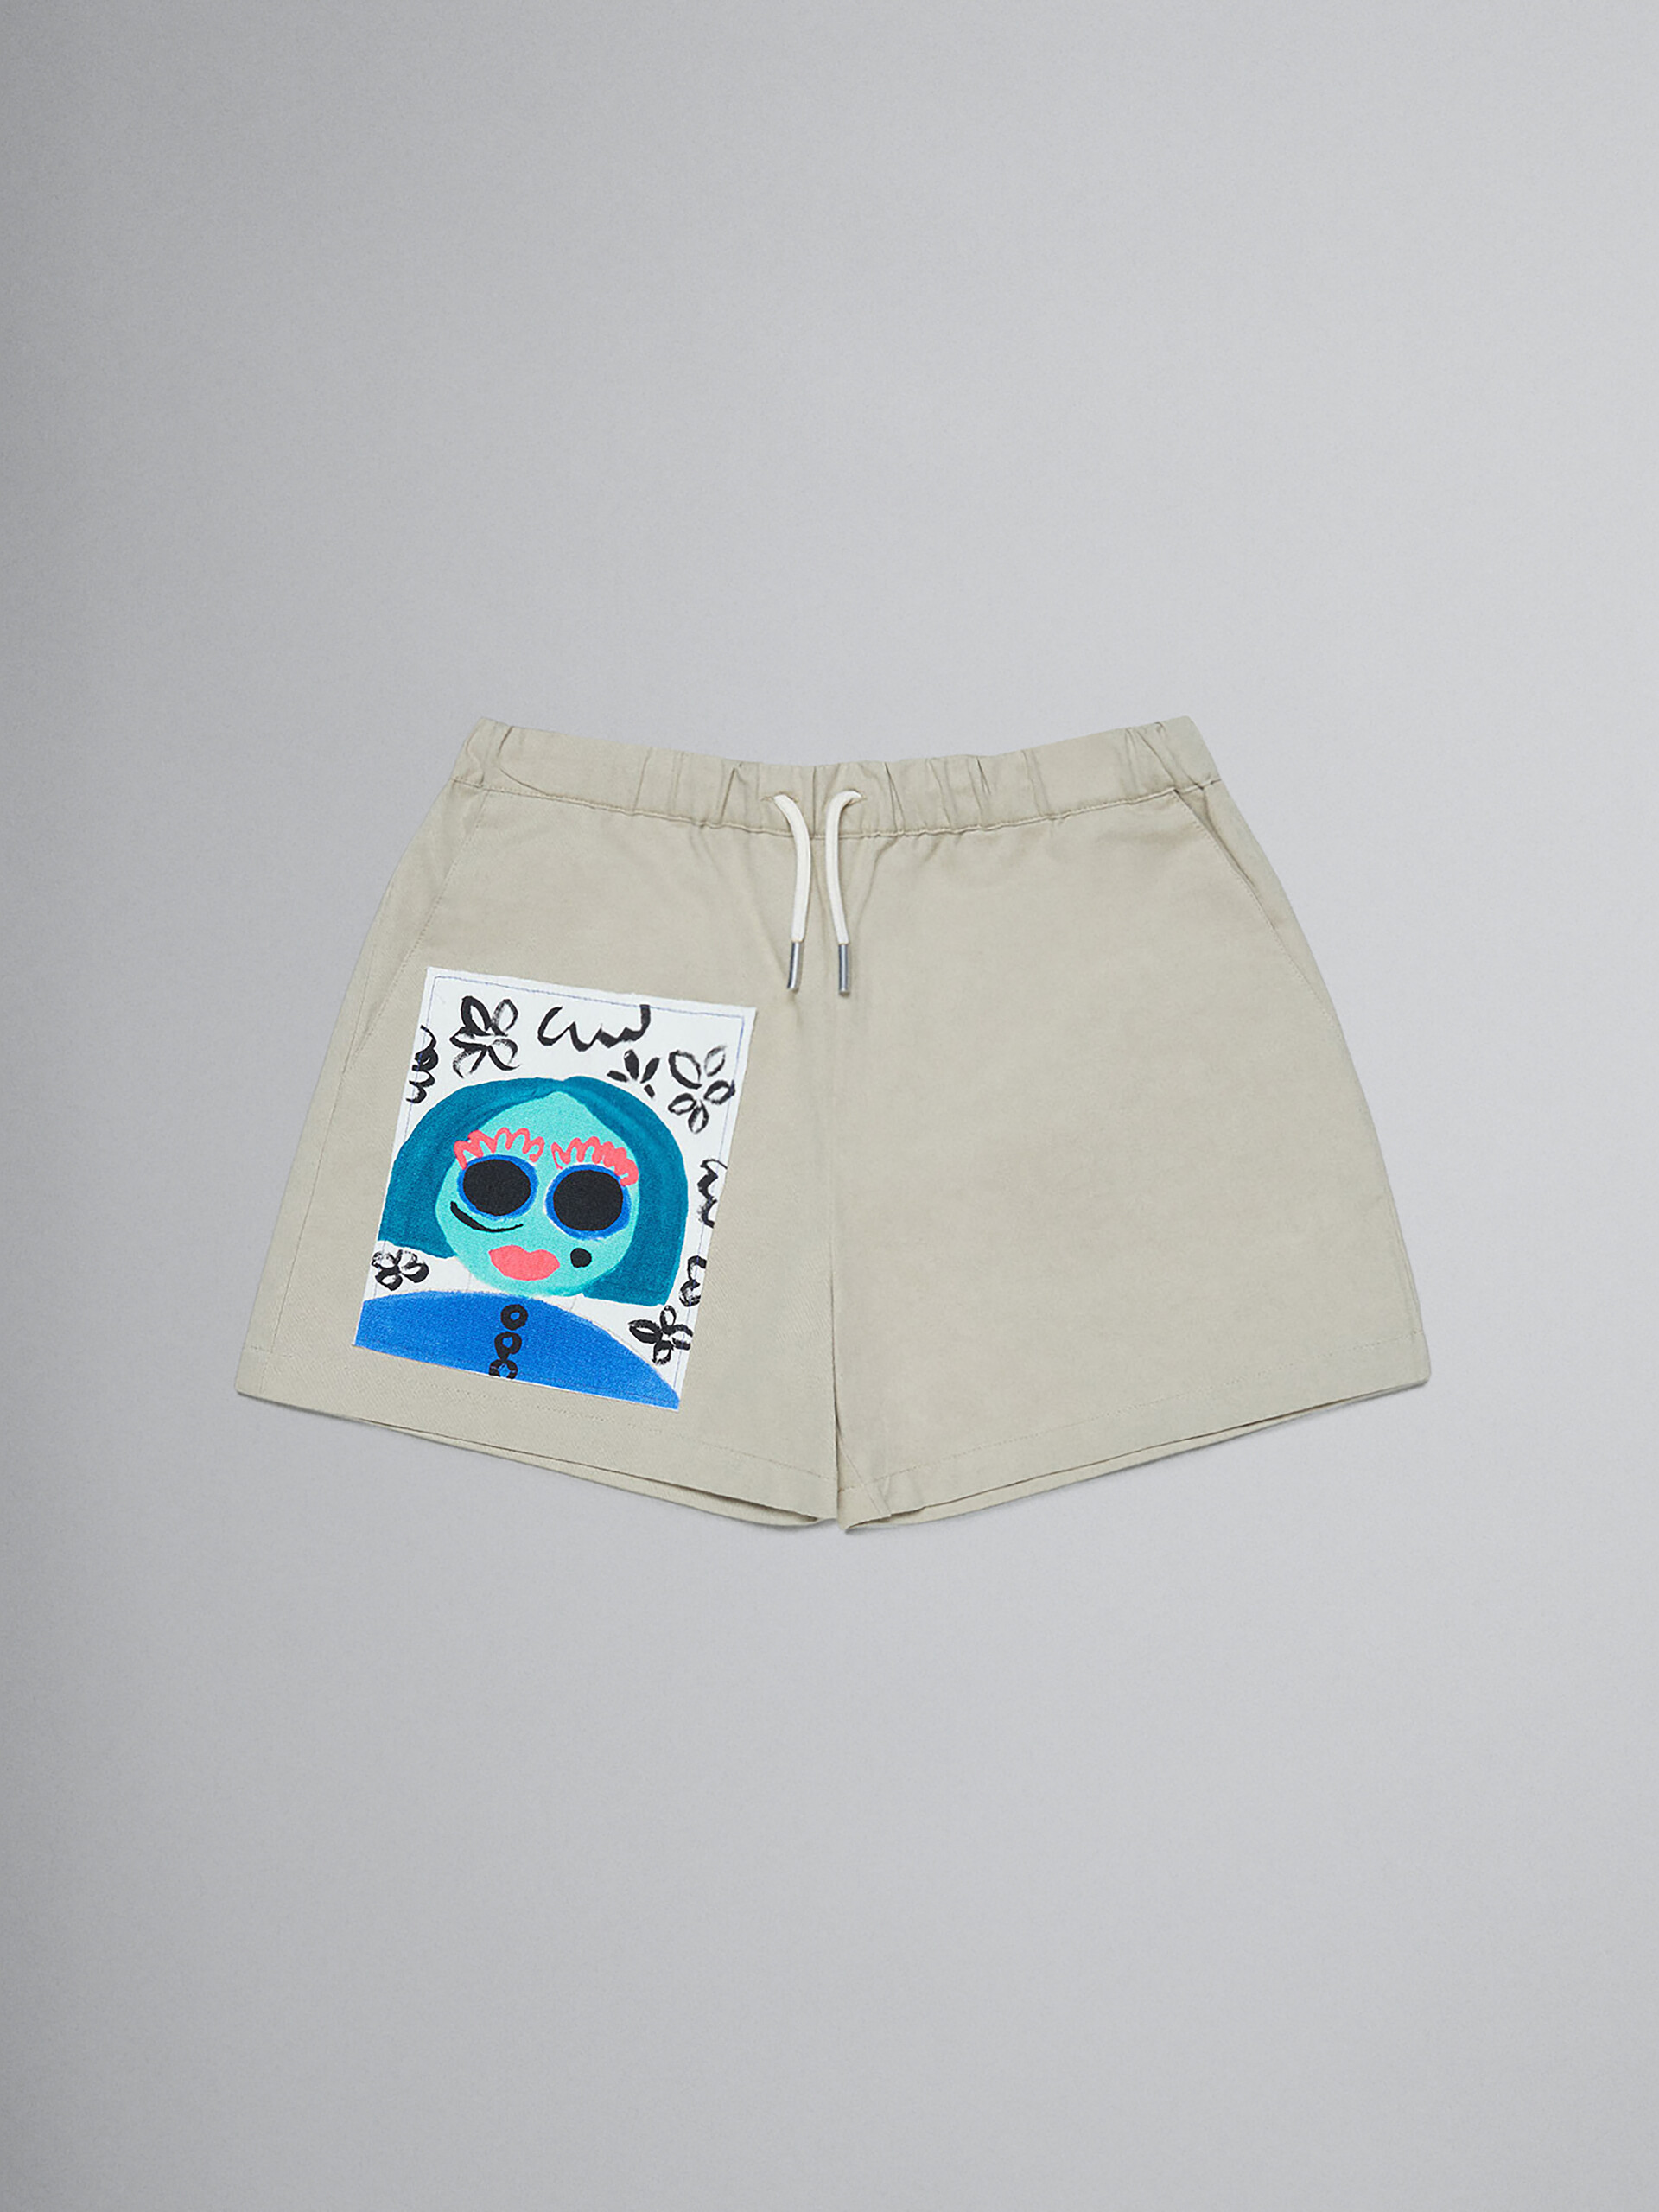 Beige gabardine shorts with printed face - Pants - Image 1